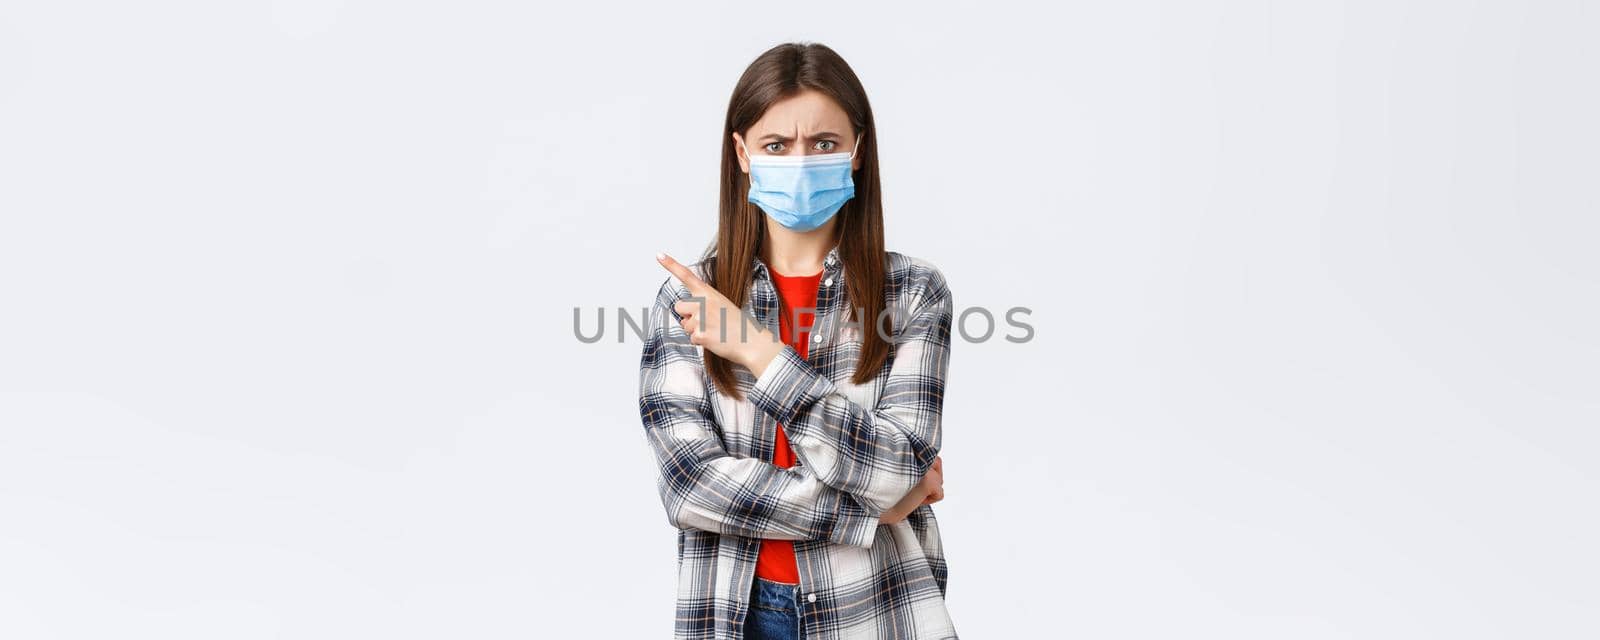 Coronavirus outbreak, leisure on quarantine, social distancing and emotions concept. Angry and disappointed young female in medical mask, pointing finger upper left corner, frowning mad.